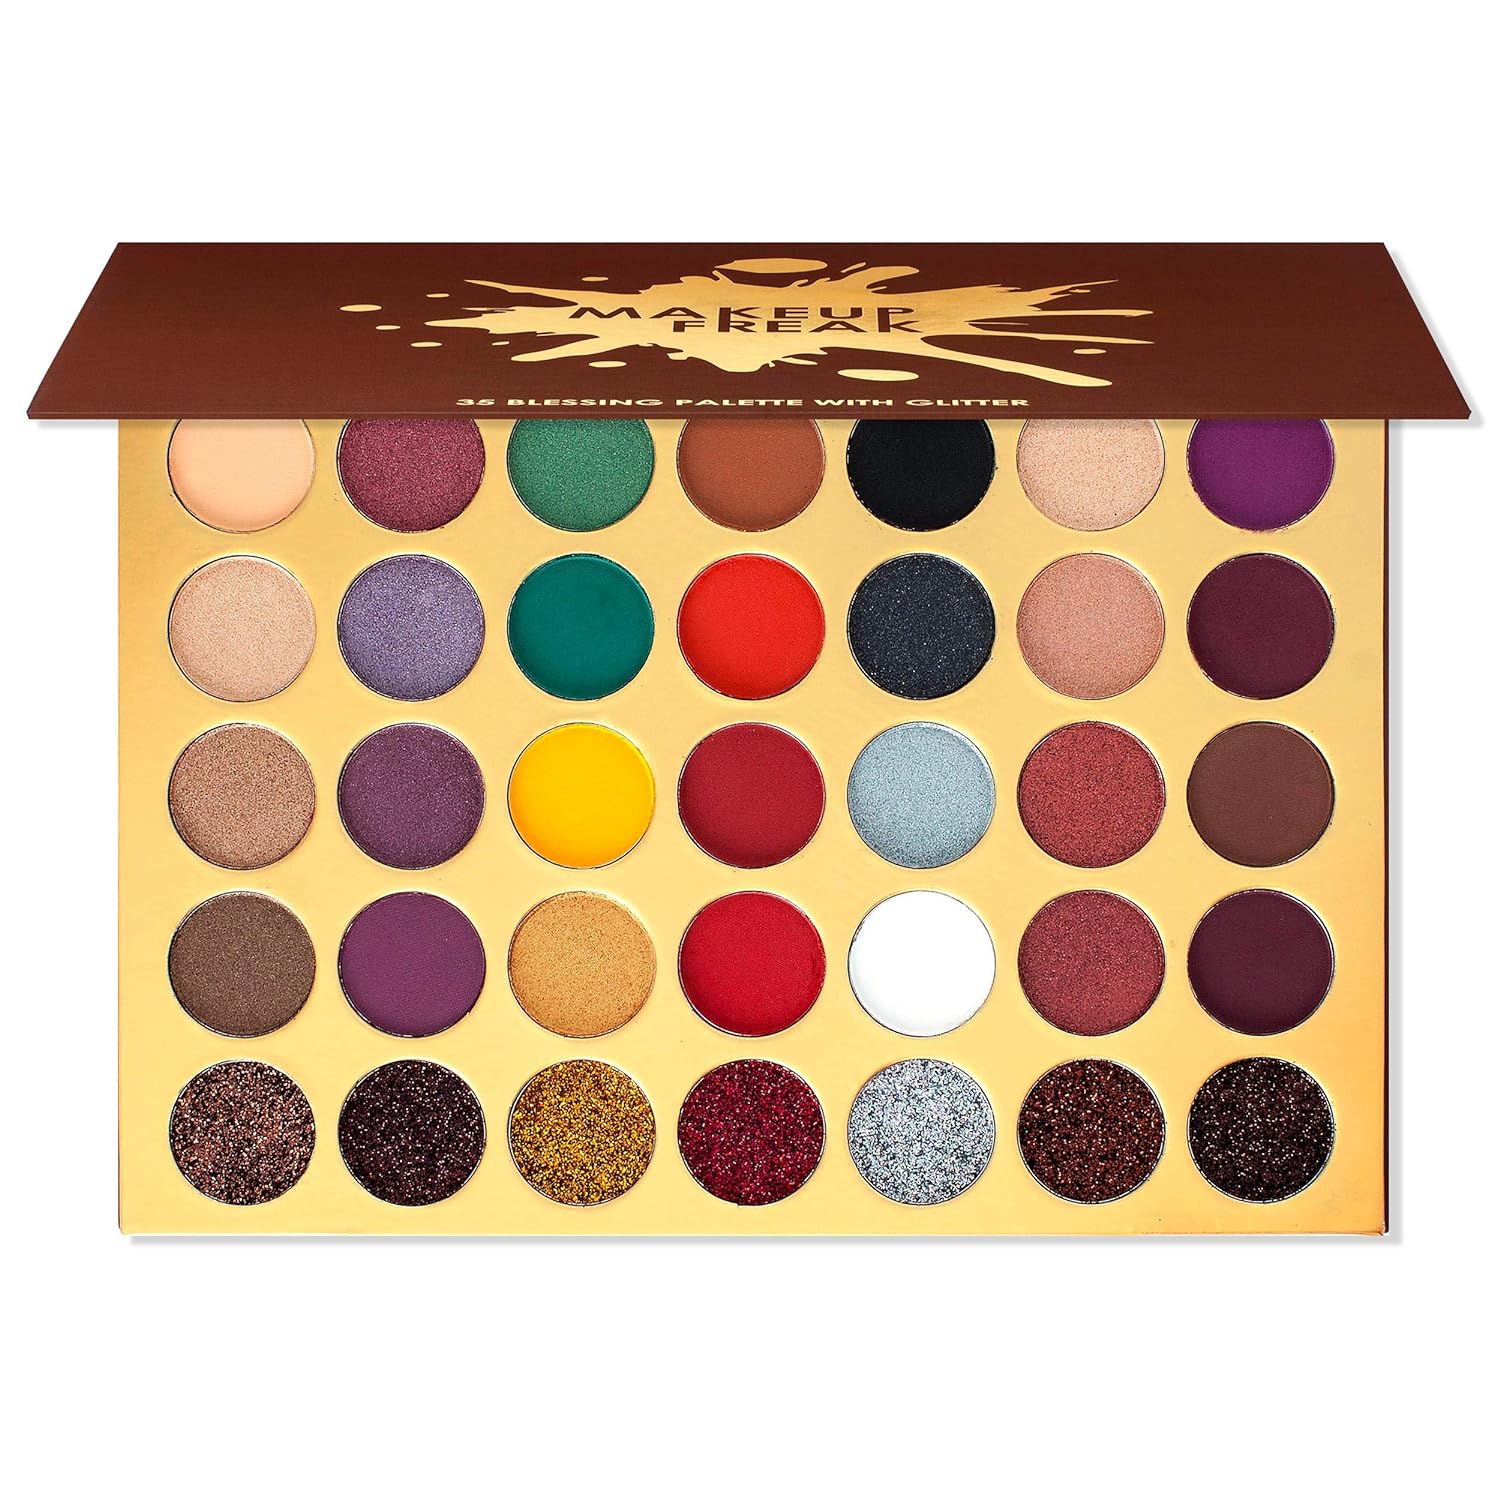 Makeup Freak Blessing 35 Color Pigmented Eyeshadow Palette with Glitter Autumn